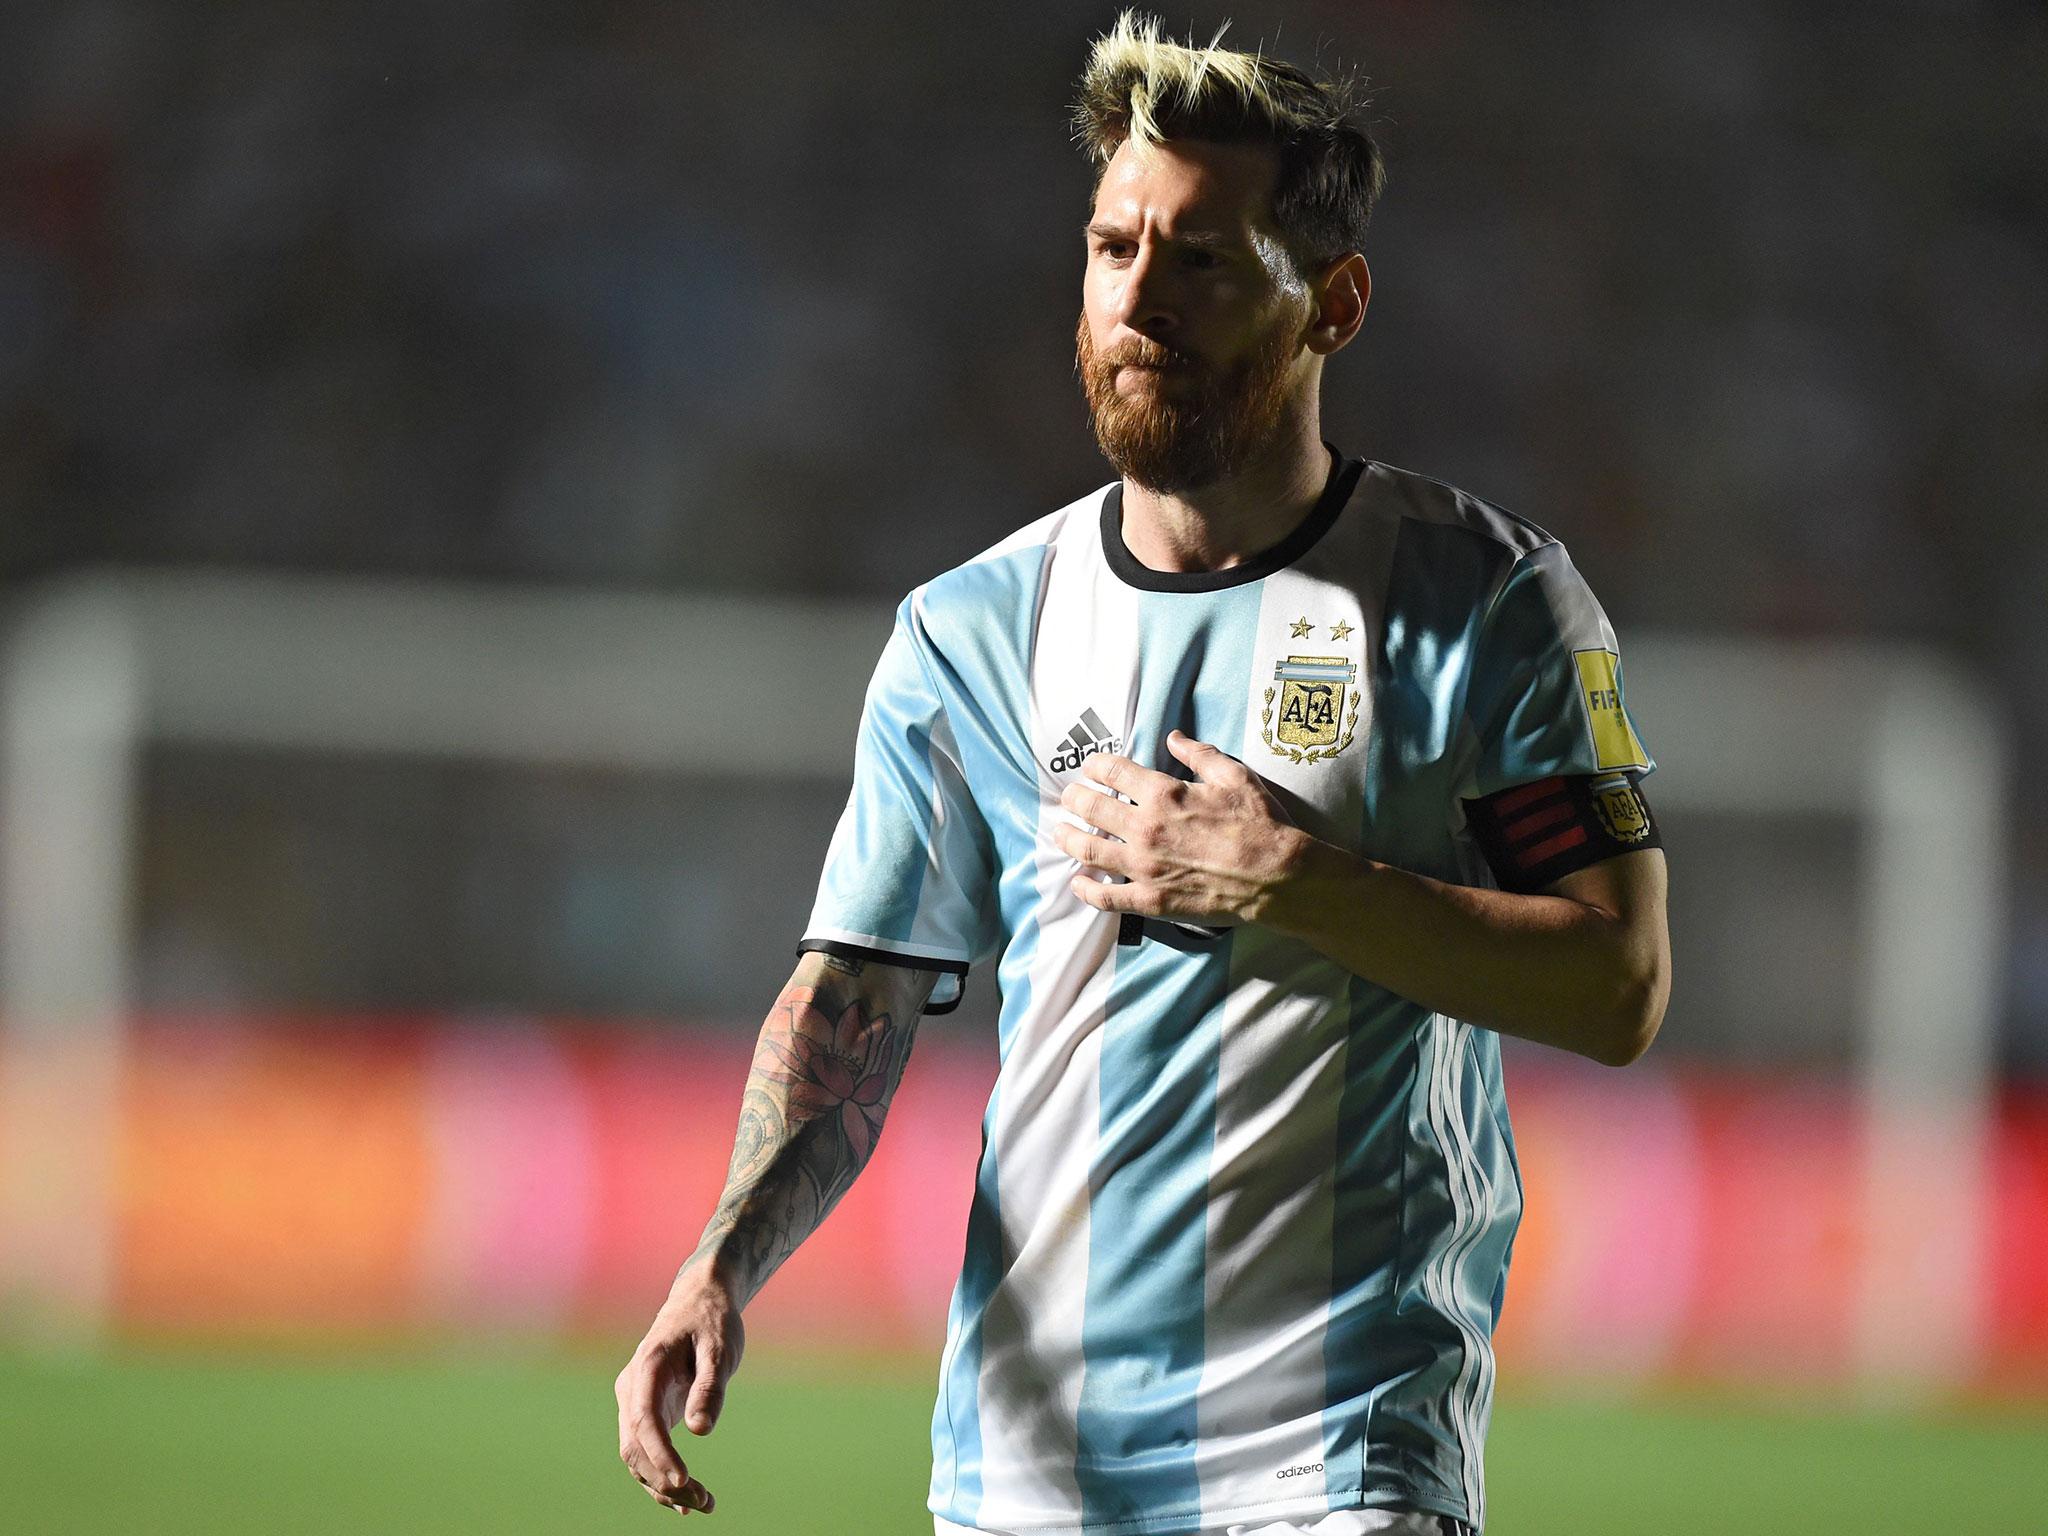 Messi was approached by desperate workers before his side's 3-0 defeat to Brazil